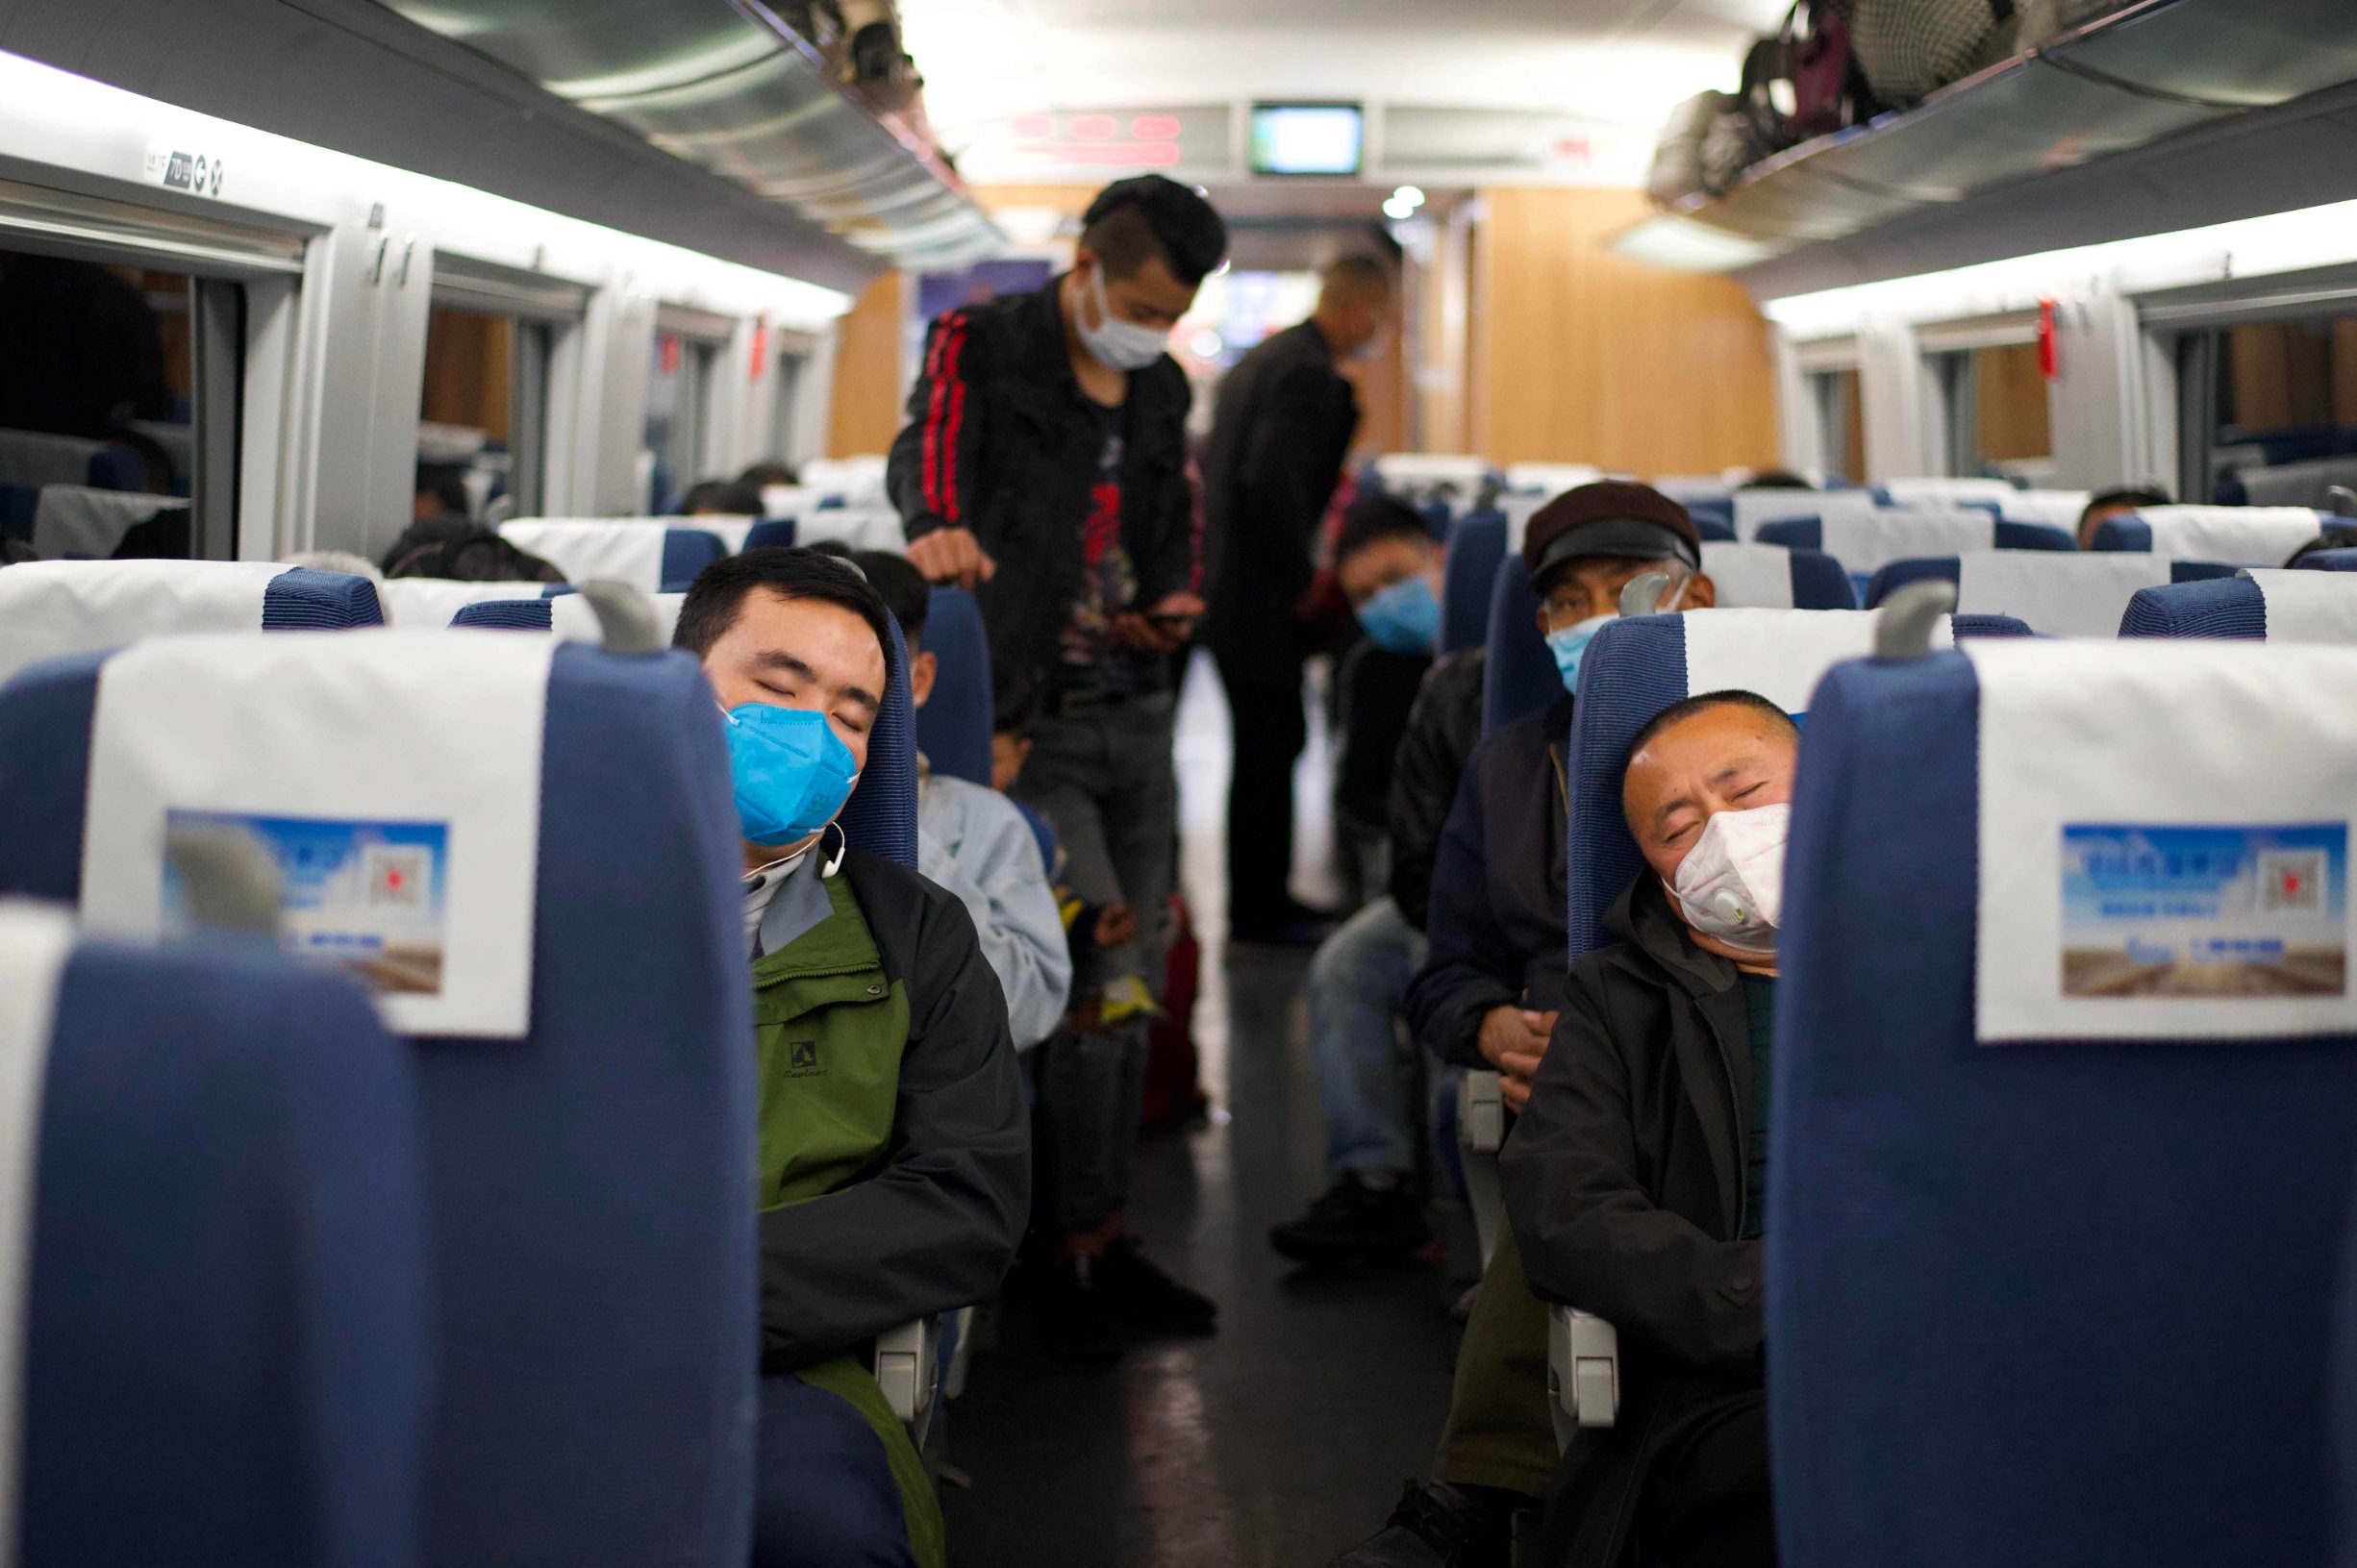 Passengers wearing face masks sleep as the train stops at the railway station in Macheng, in Chinas central Hubei province on March 25, 2020. - China lifted tough restrictions on the province at the epicentre of the coronavirus outbreak on March 25 after a months-long lockdown as the country reported no new domestic cases. (Photo by Noel Celis / AFP)